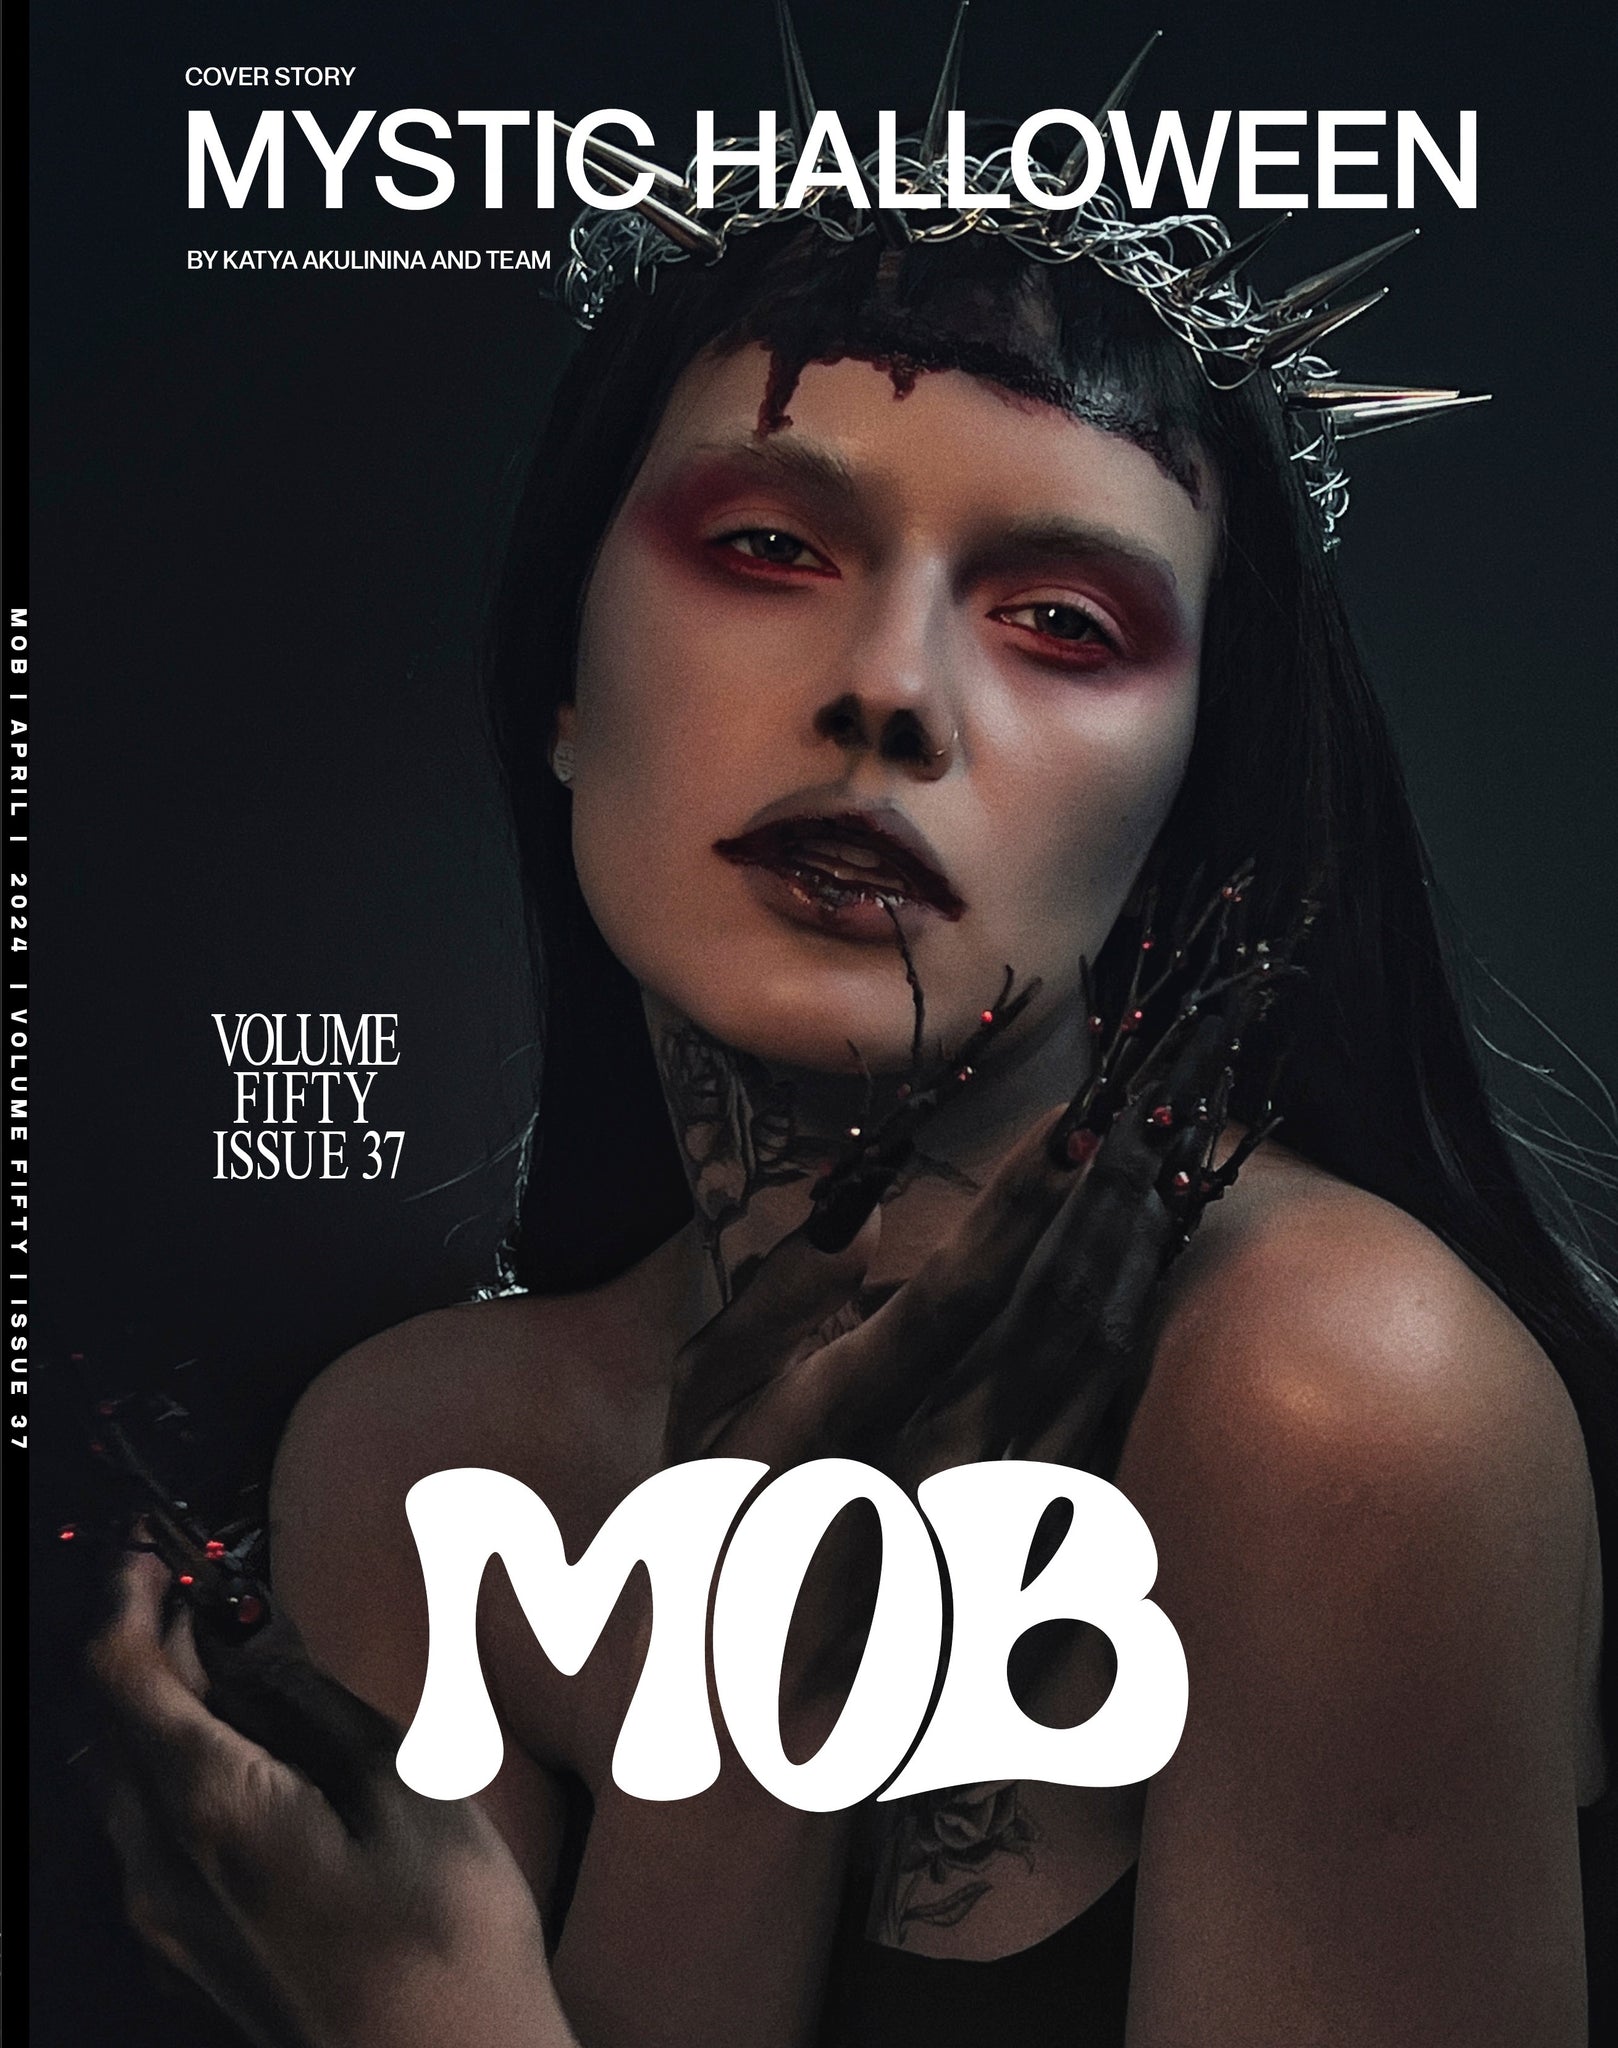 MOB JOURNAL | VOLUME FIFTY | ISSUE #37